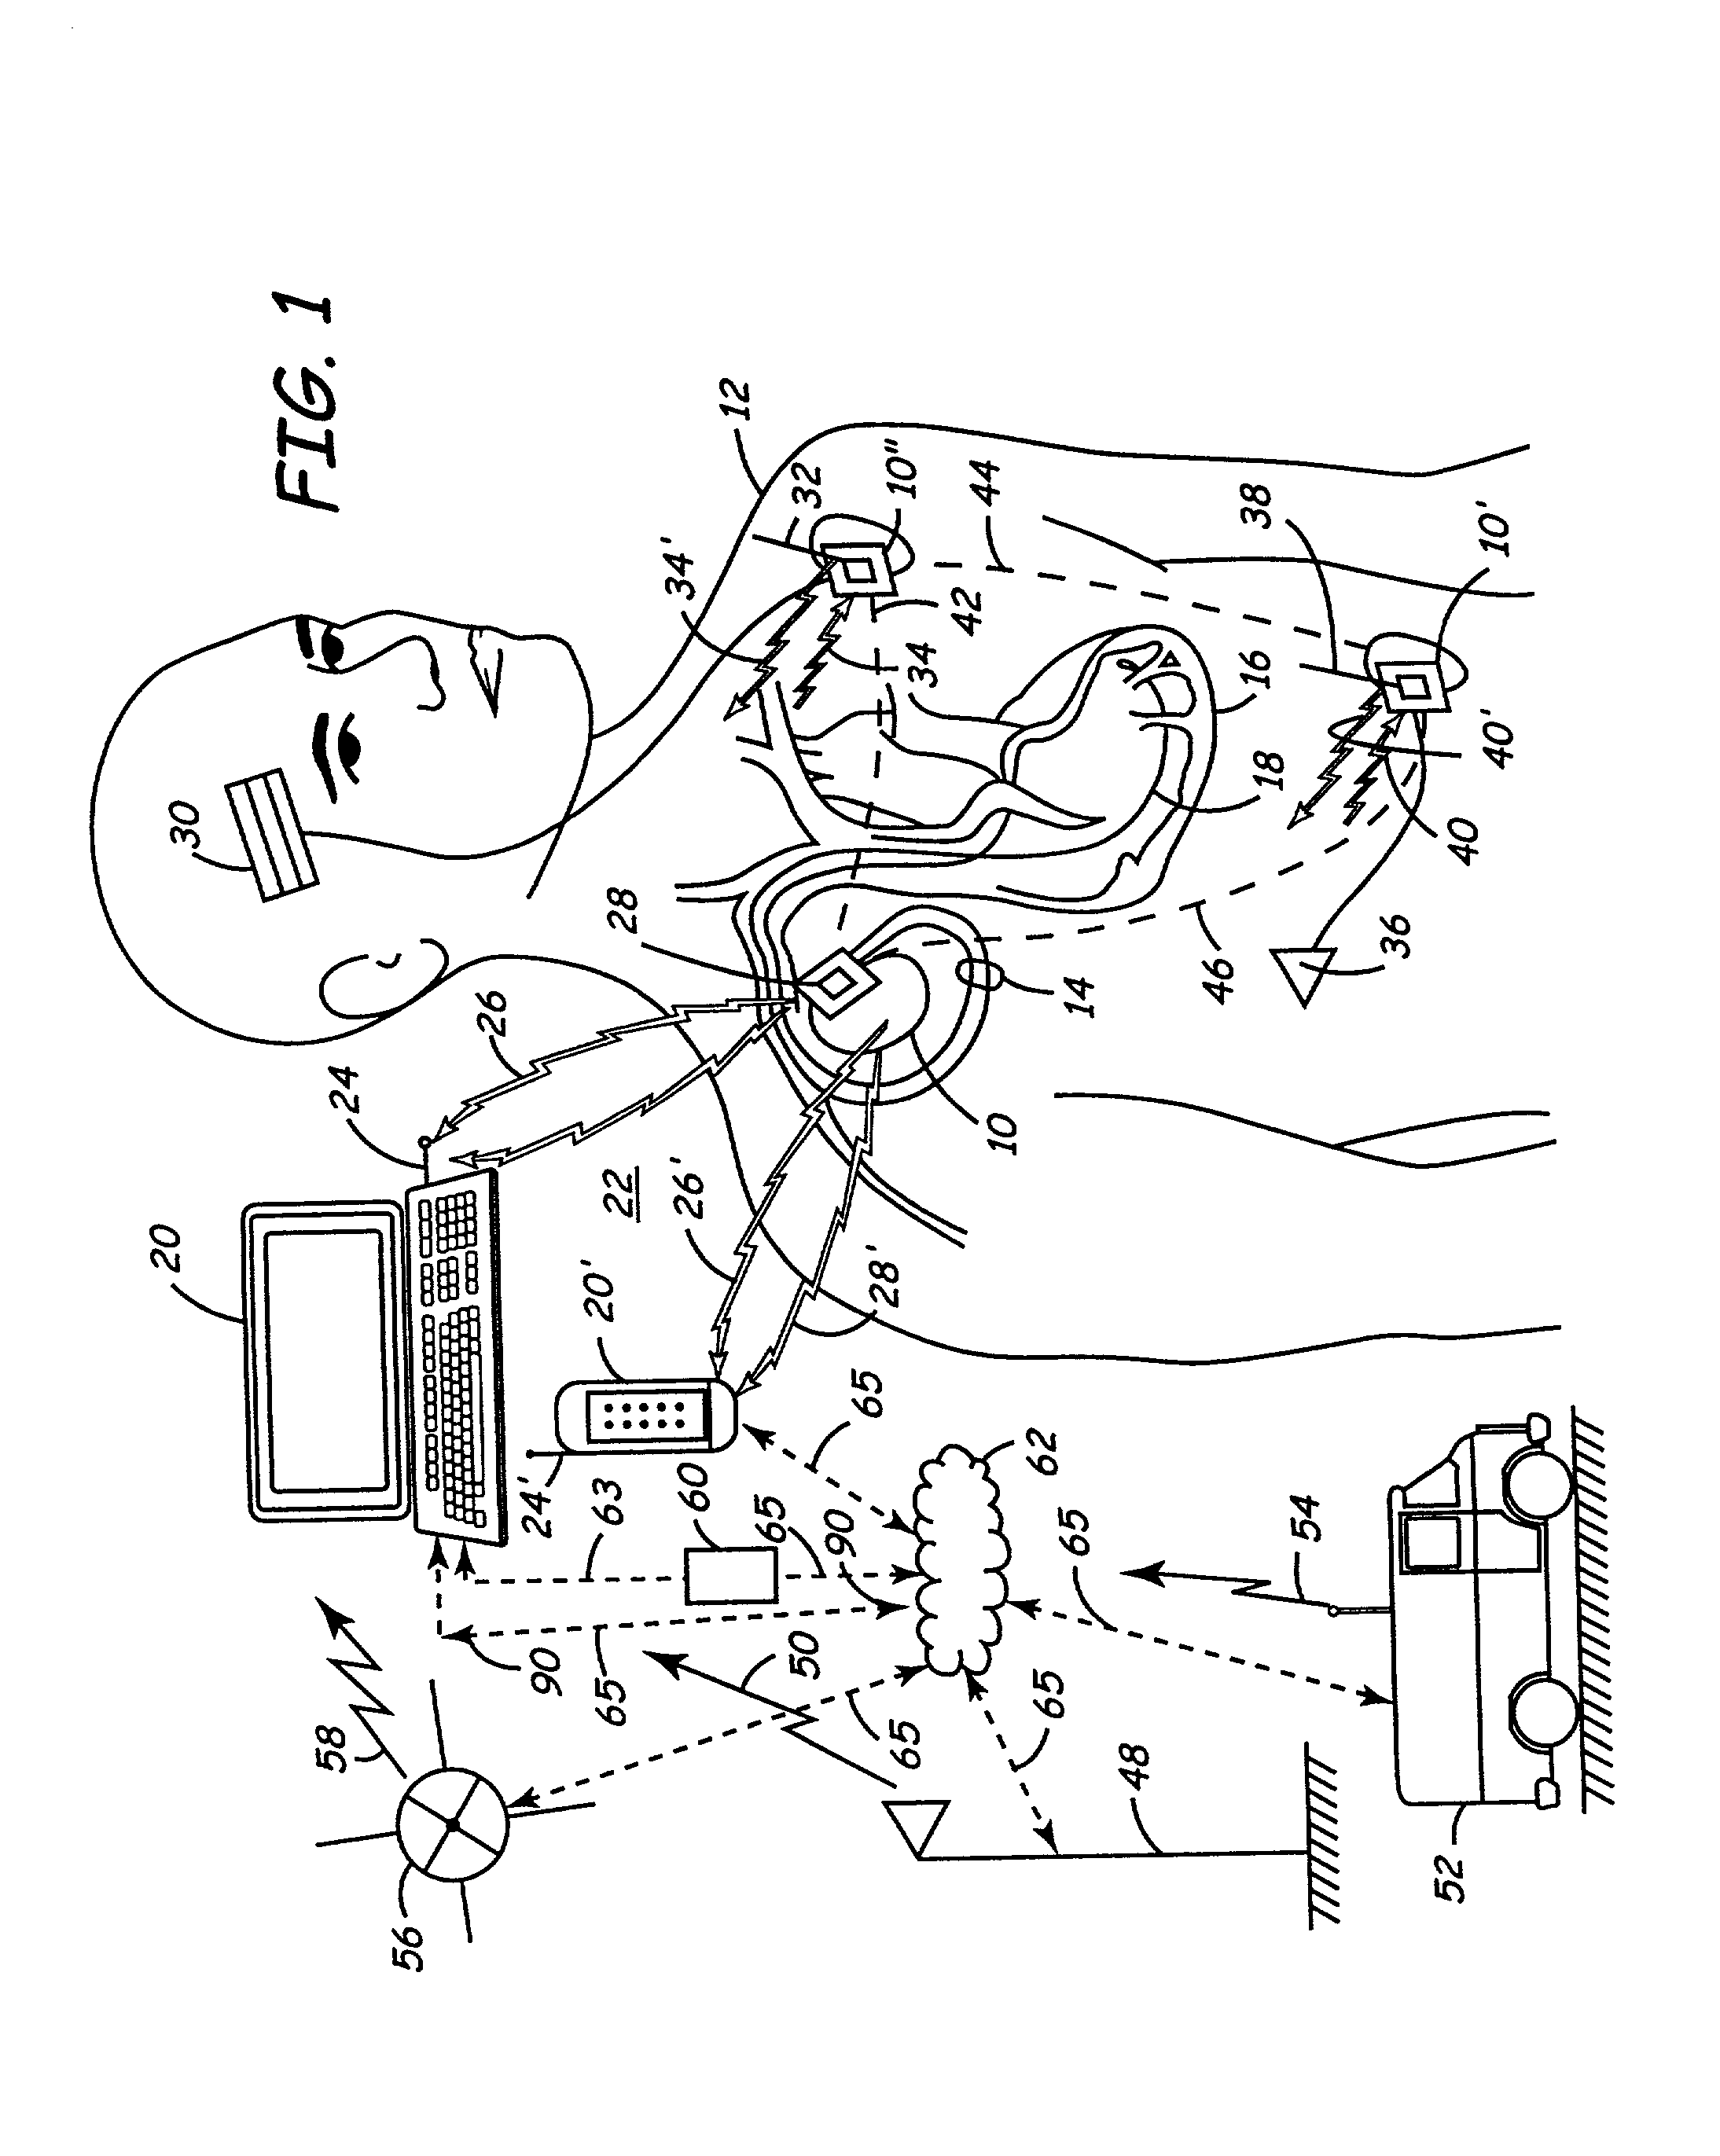 Apparatus and method for remote troubleshooting, maintenance and upgrade of implantable device systems